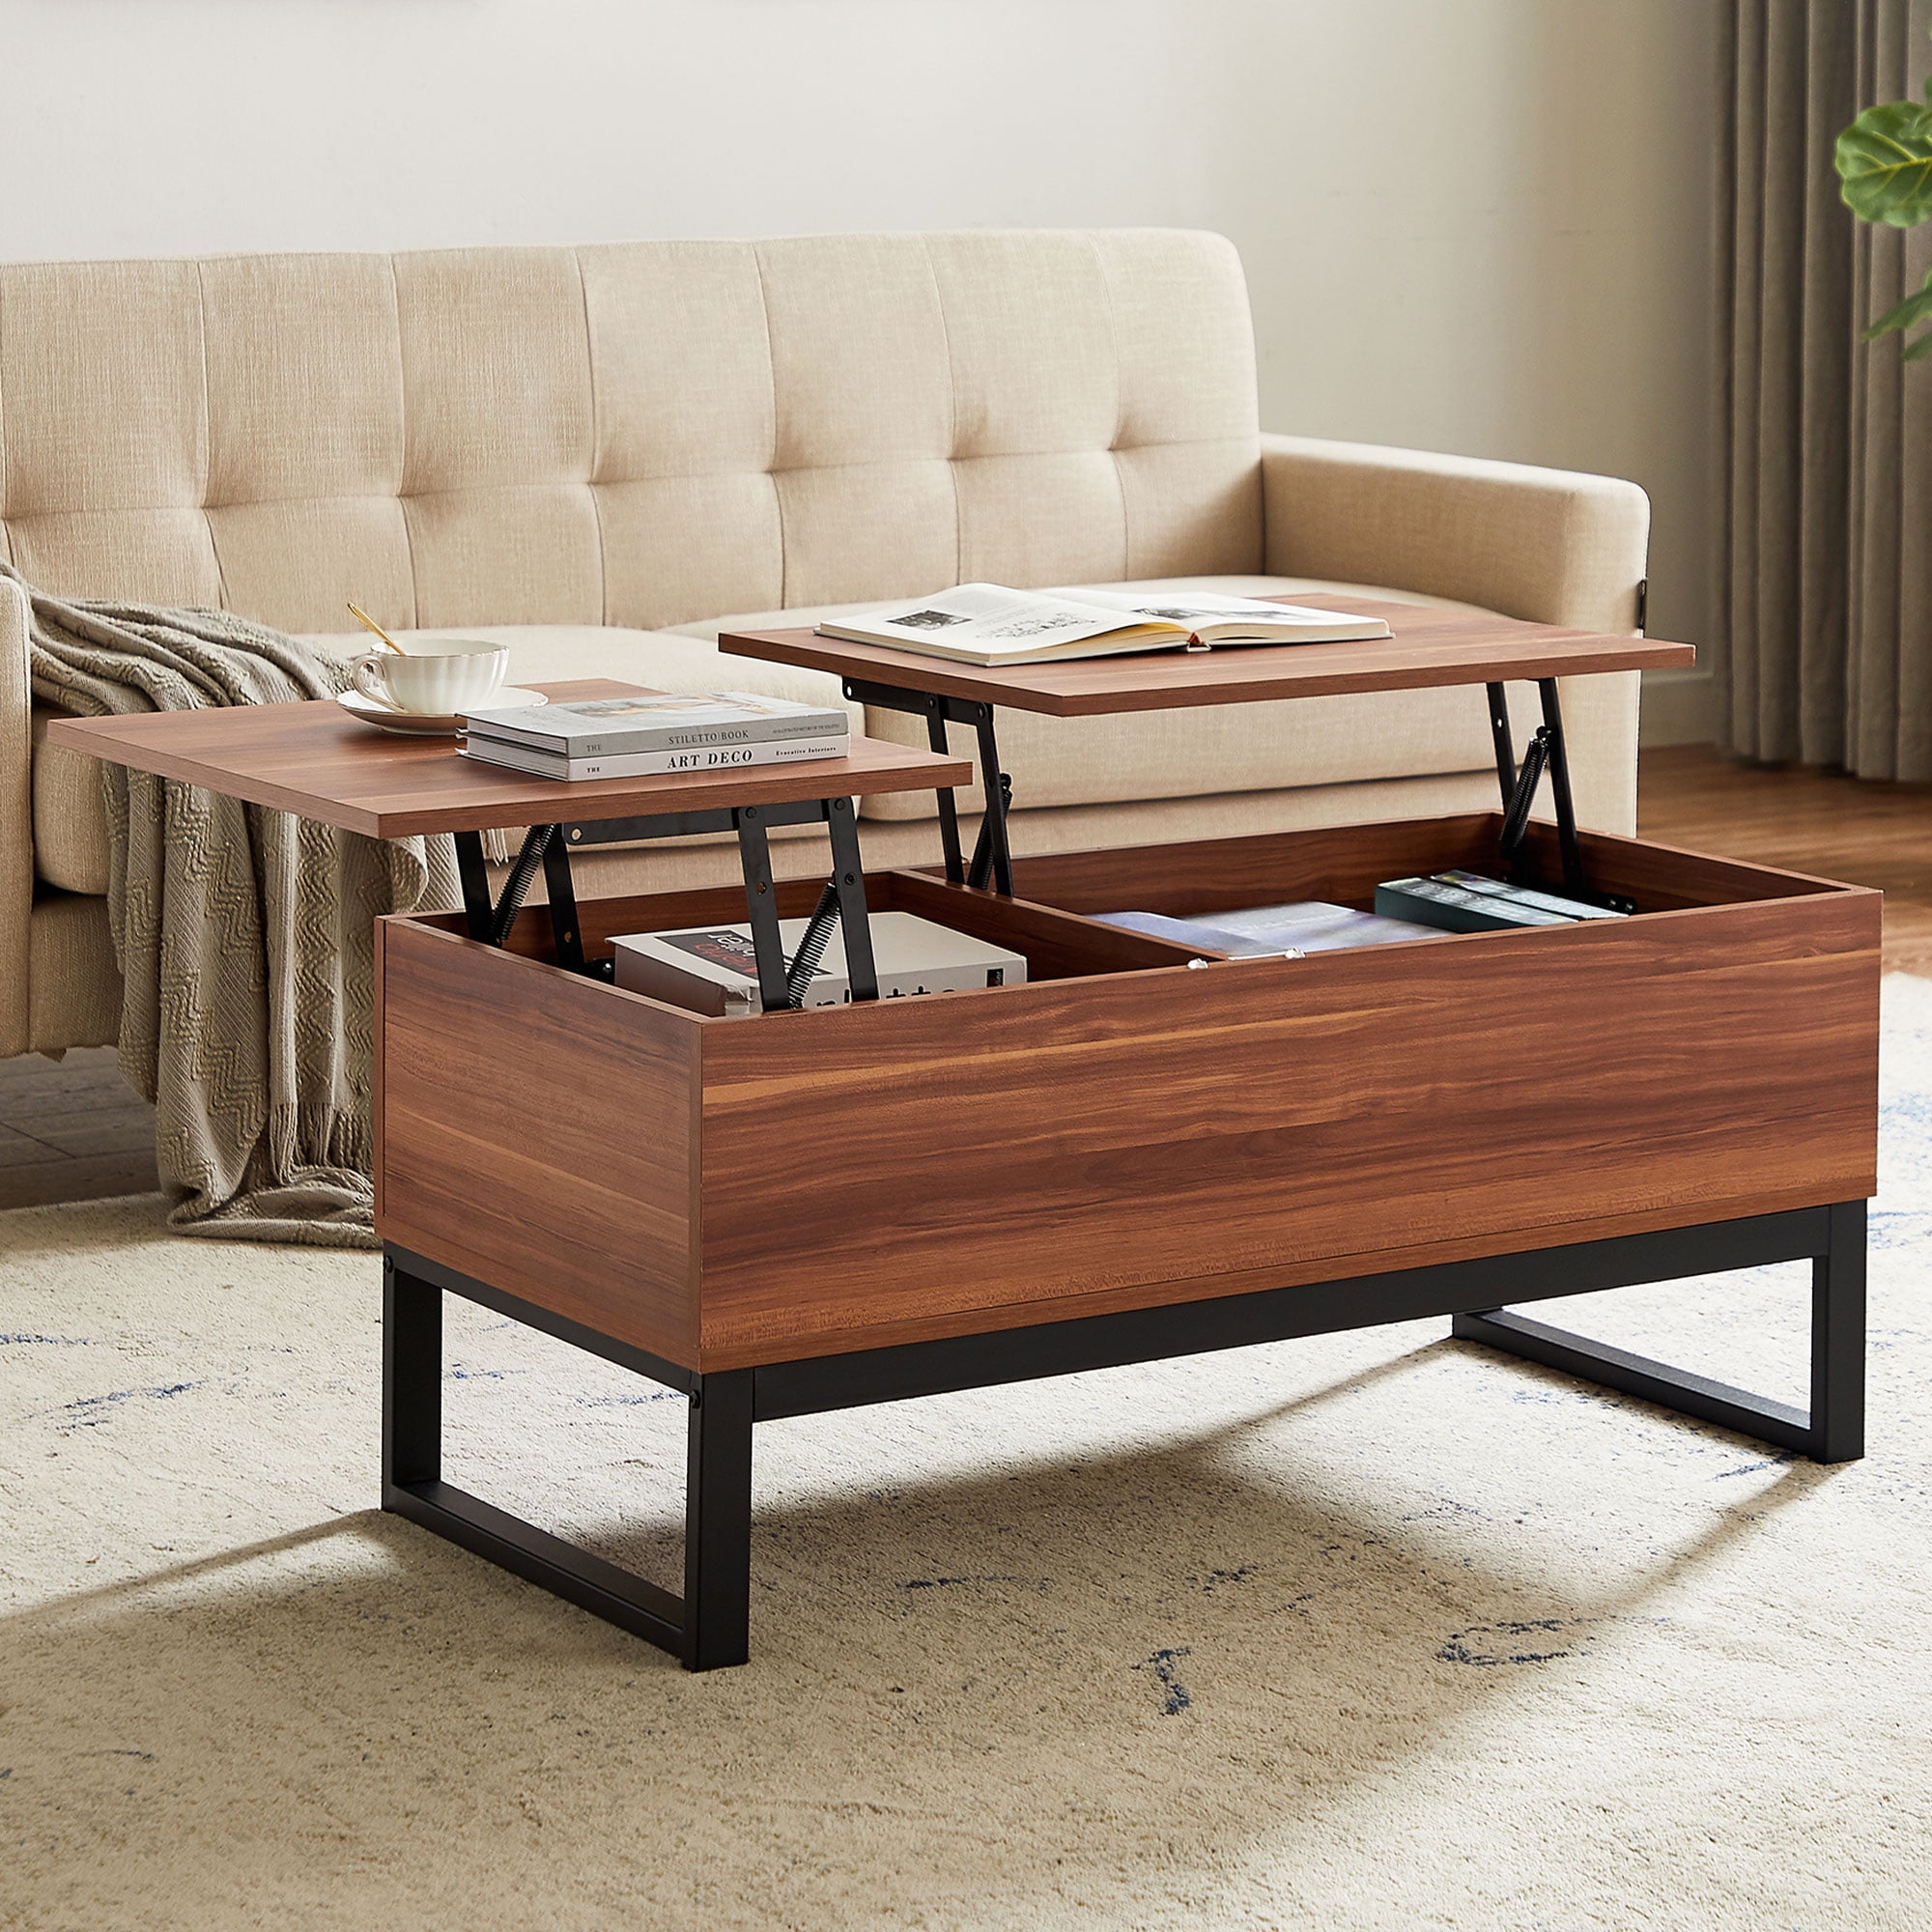 Modstyle Lift Top Coffee Table with 2 Individual Table Tops, Brown - Walmart.com